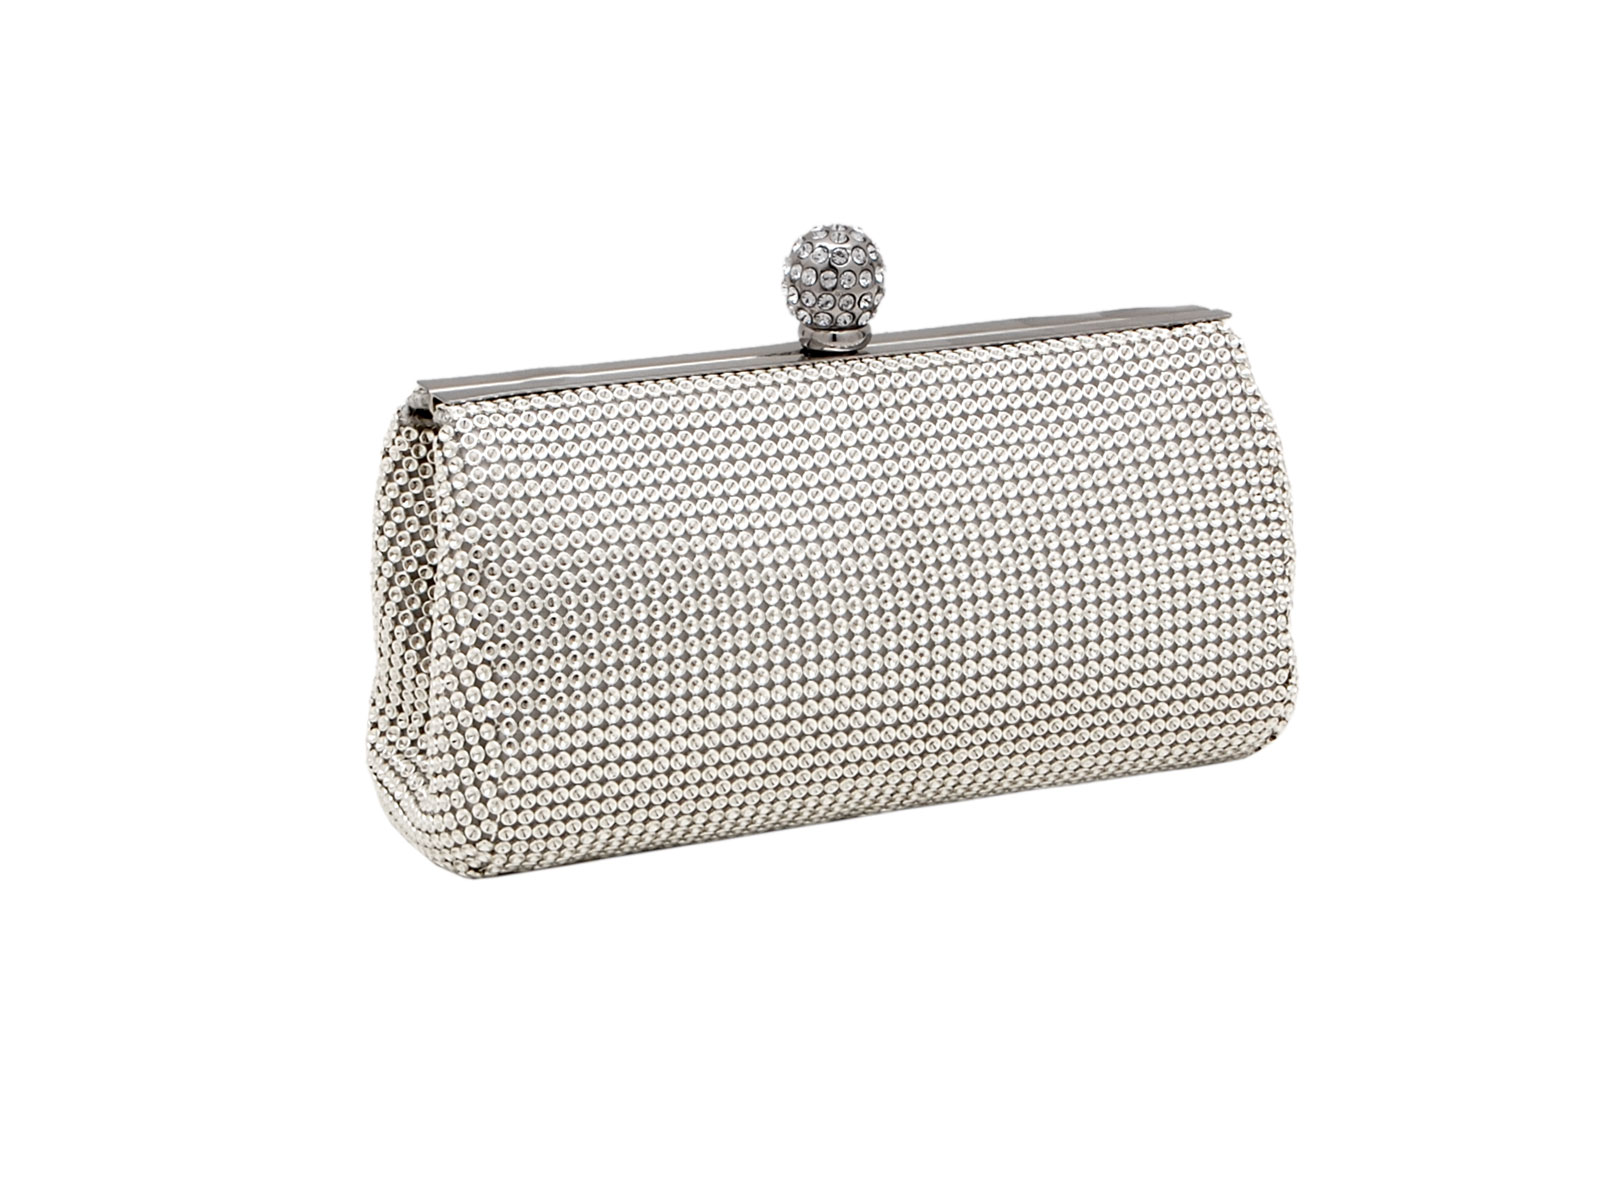 Crystal Ball Clutch - Whiting and Davis Collection